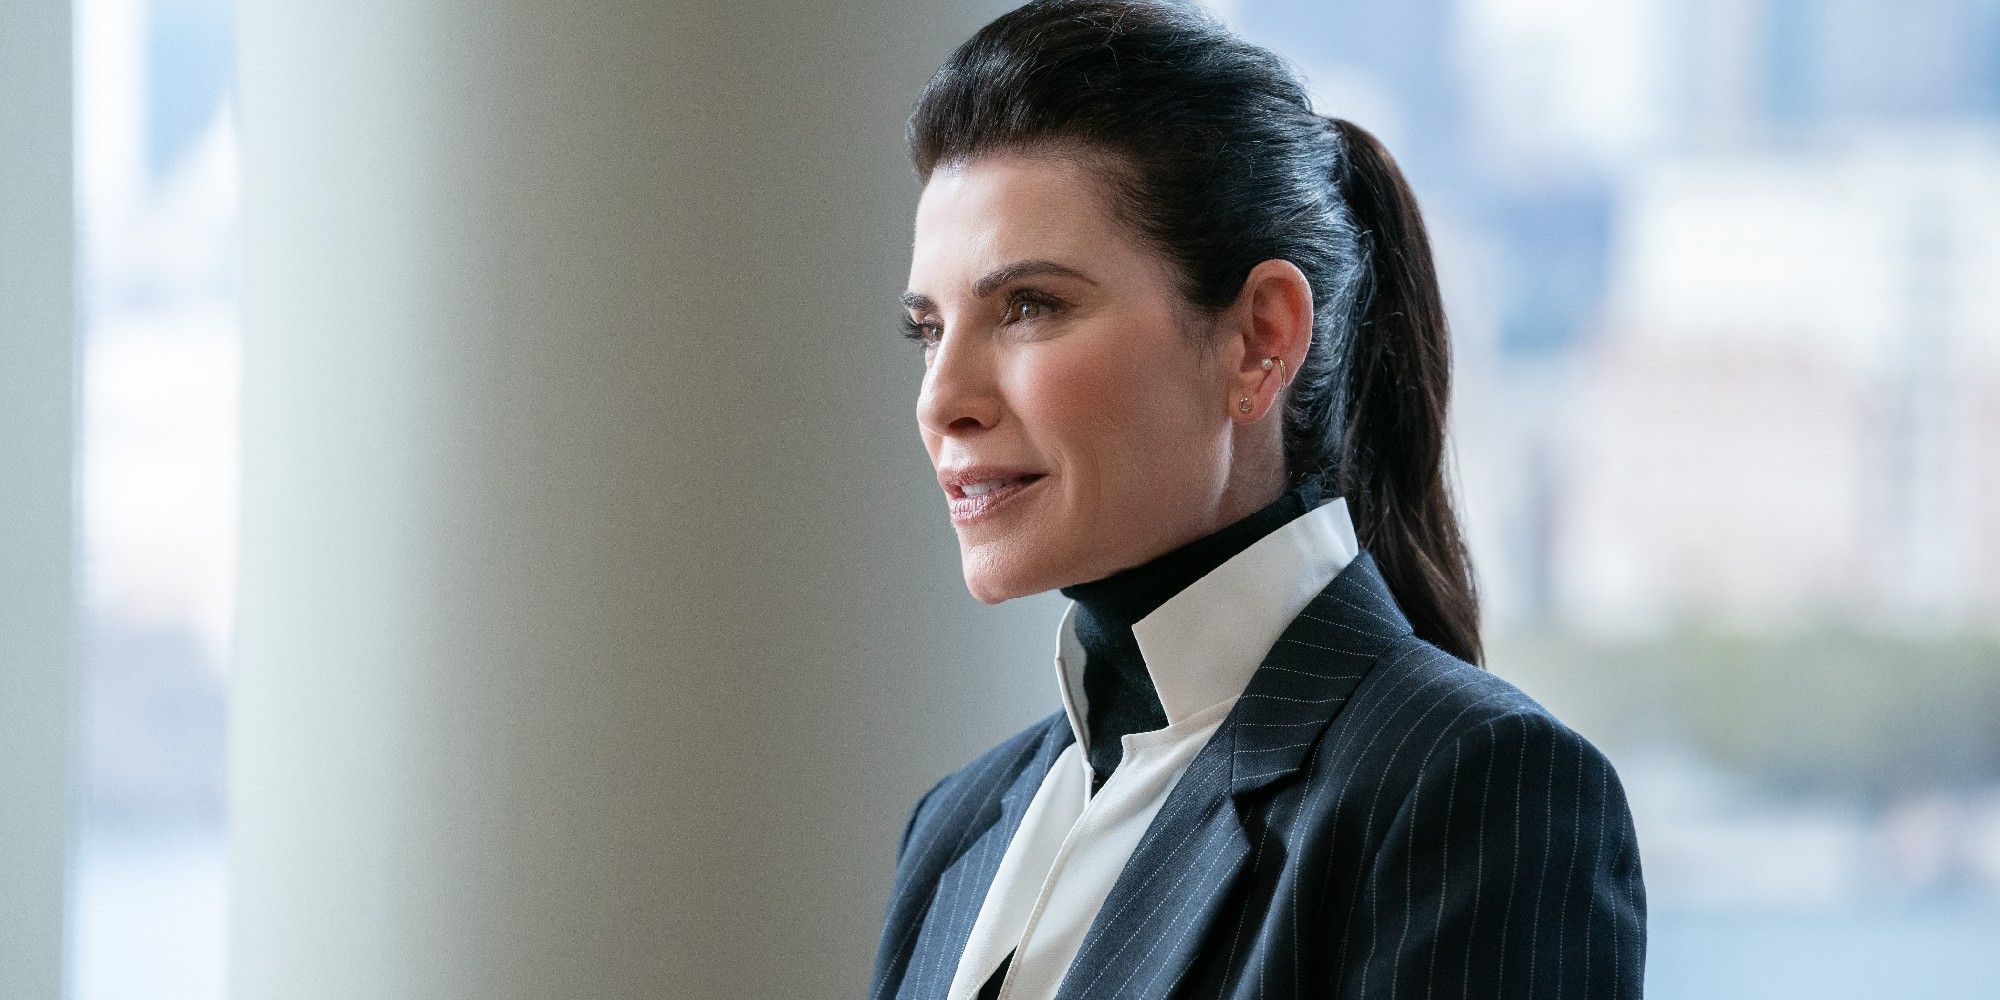 Julianna Margulies Defends Playing A Lesbian On The Morning Show